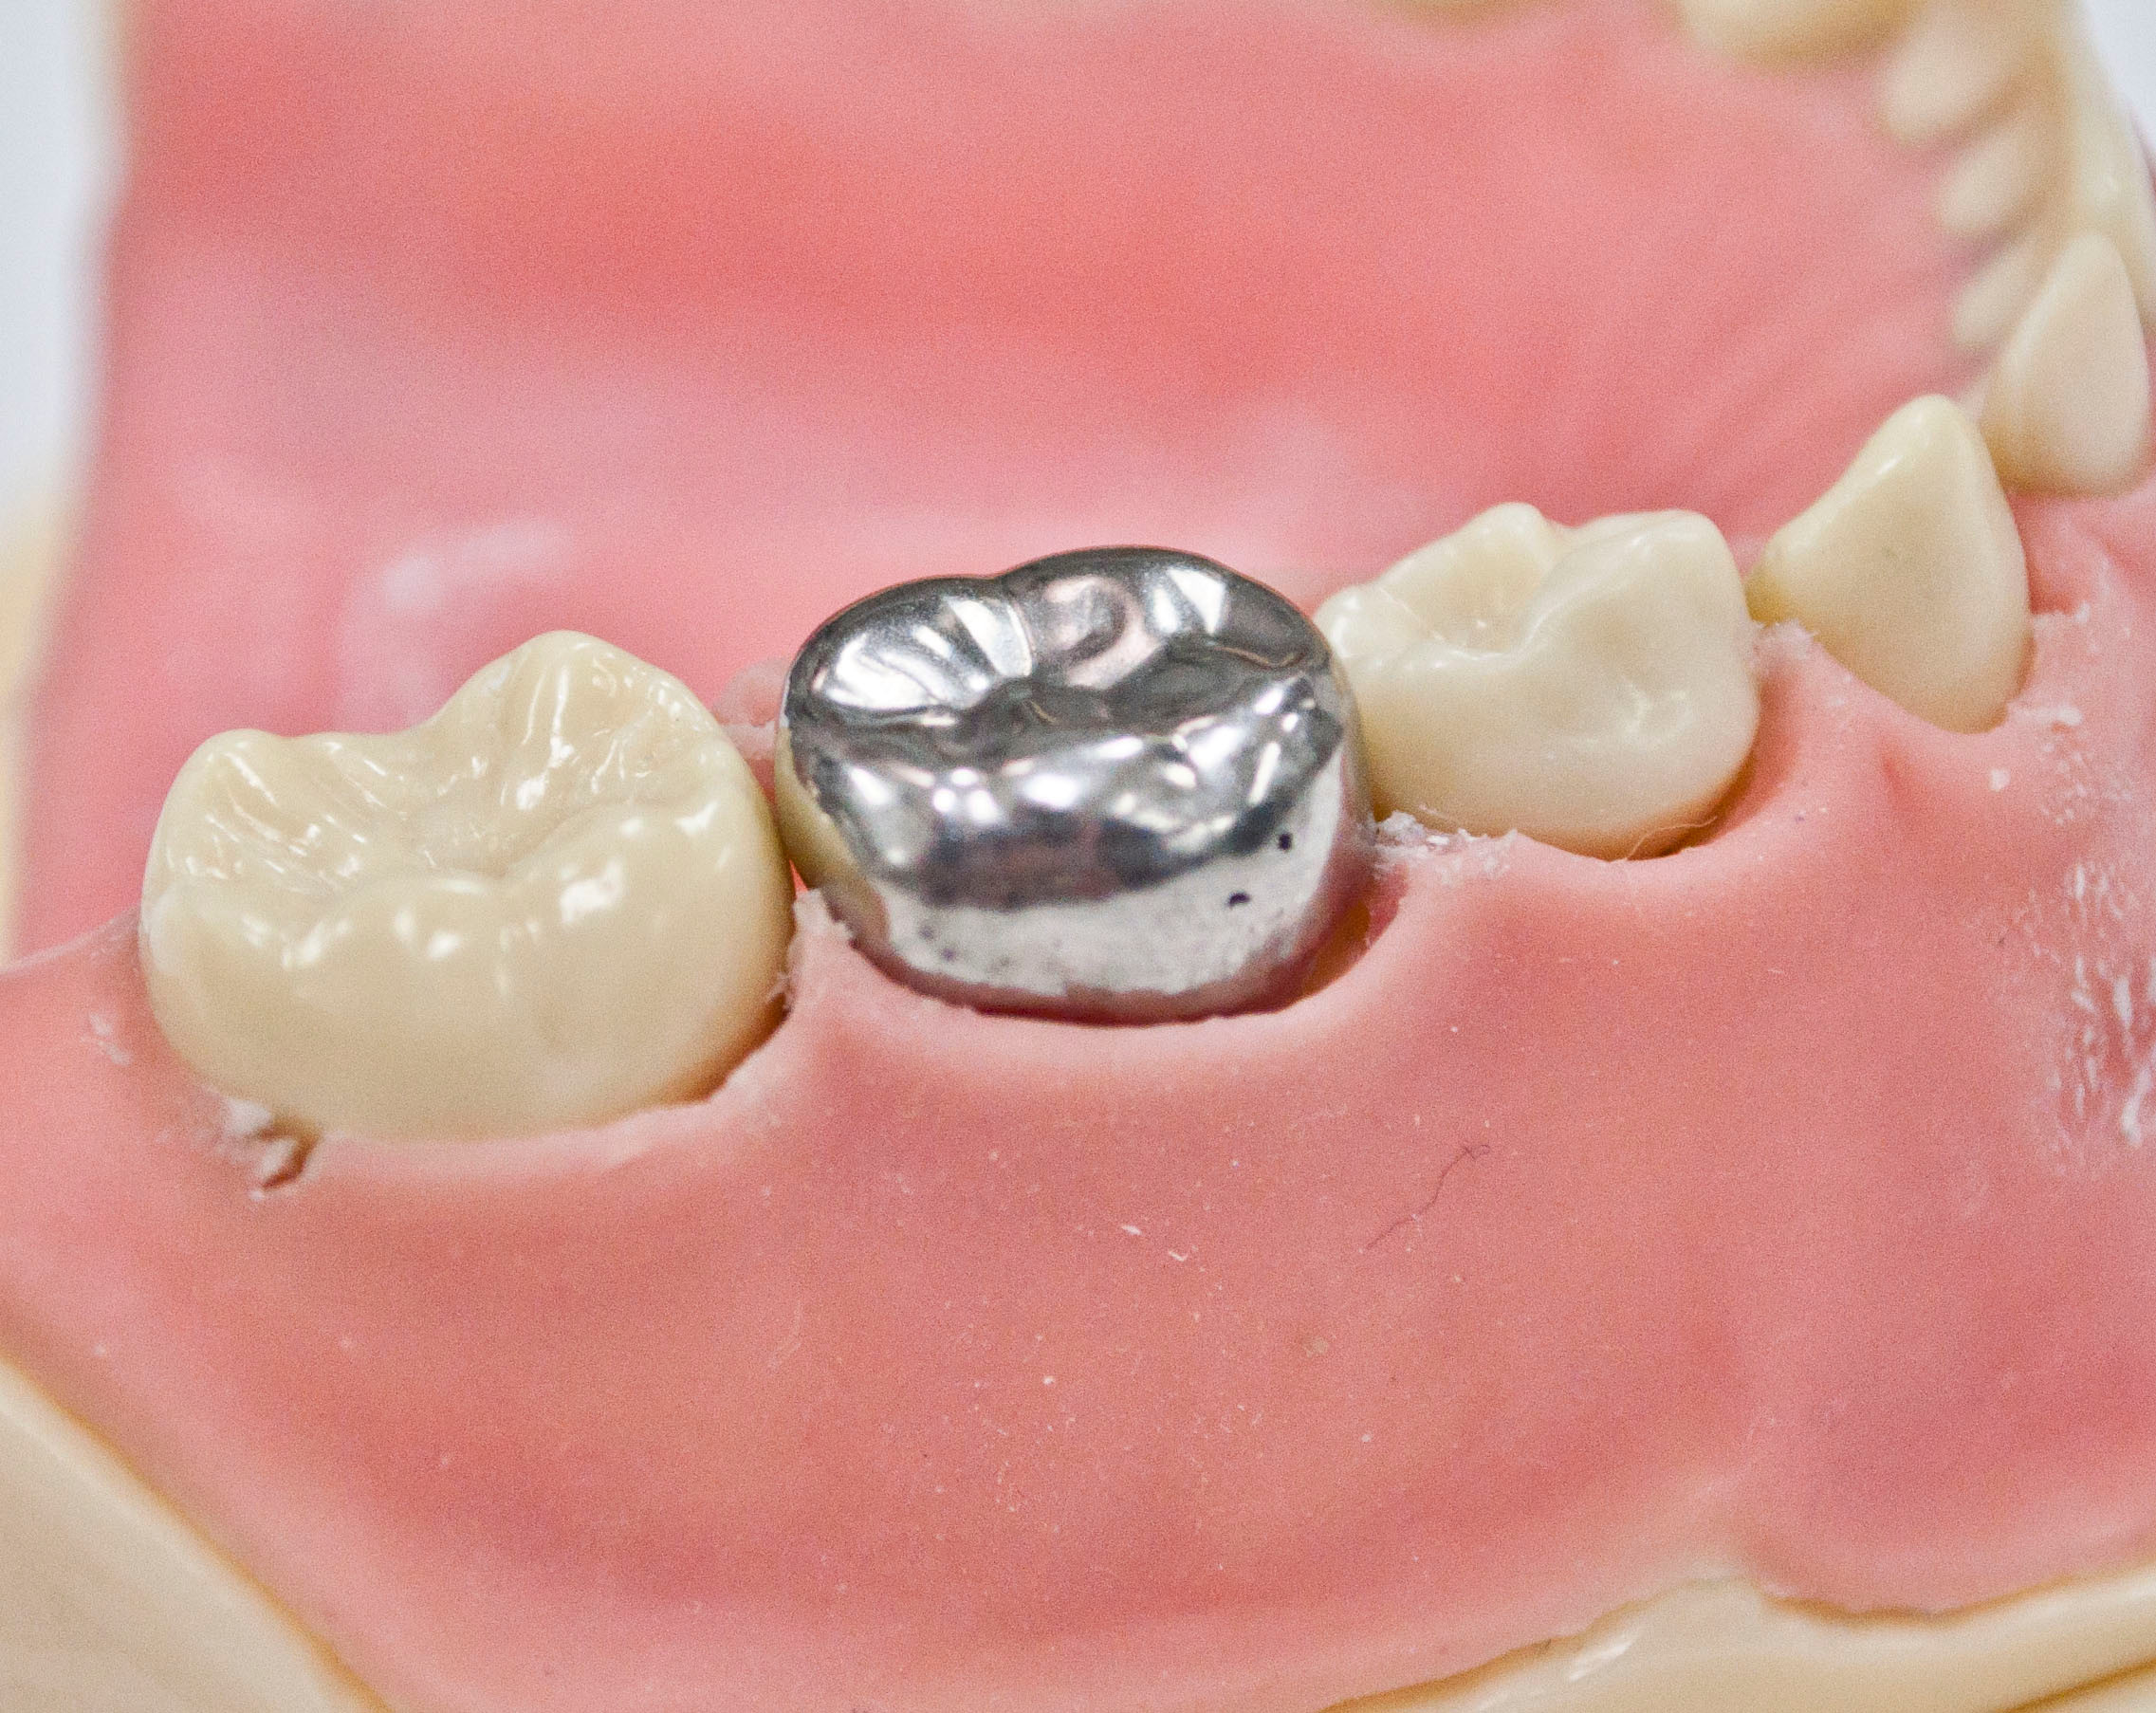 Hall Technique Stainless Steel Crown placed on a Tooth